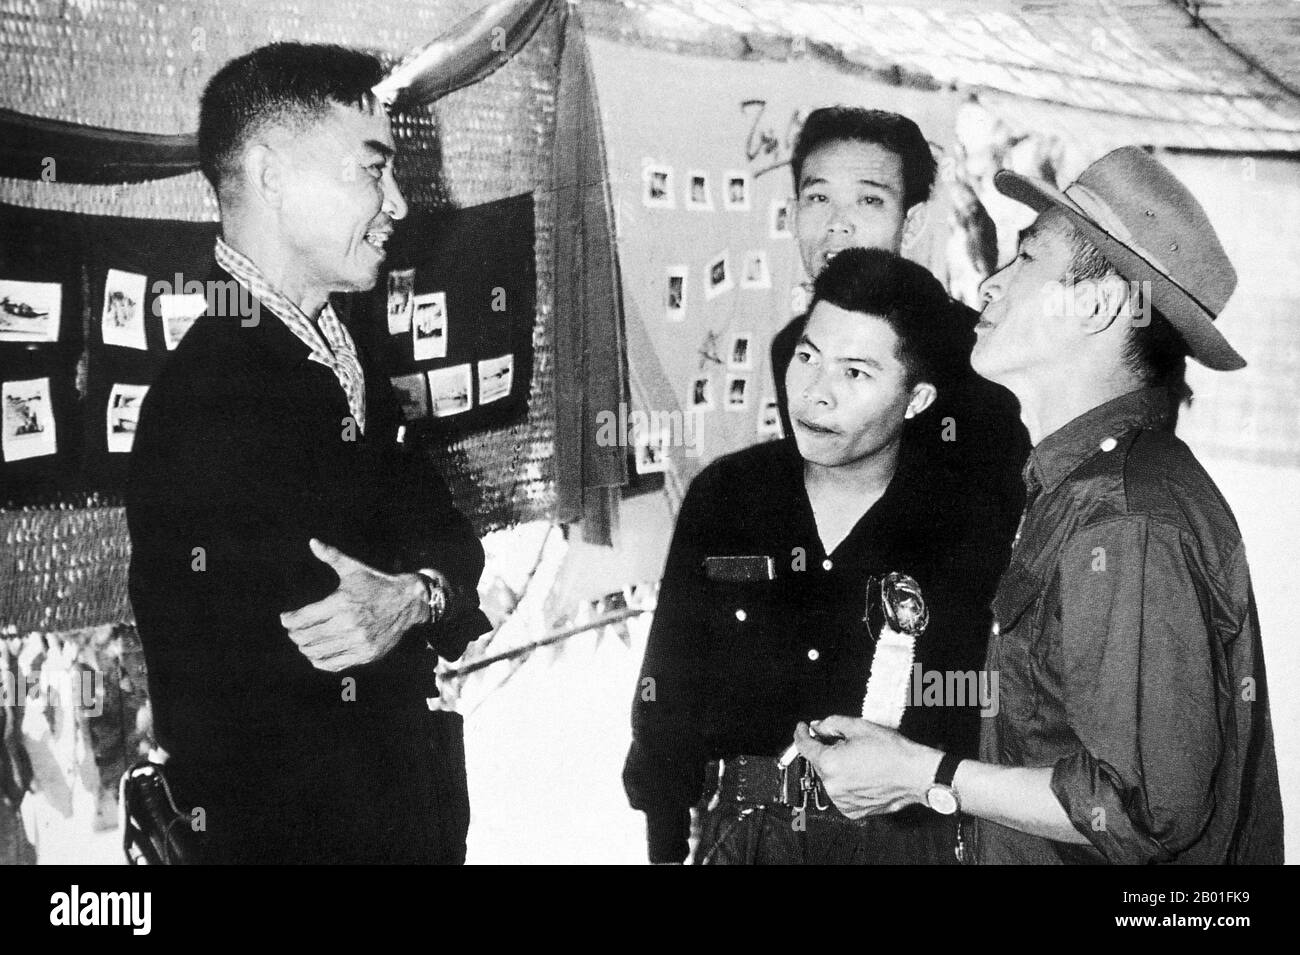 Vietnam: Huynh Tan Phat, President of the National Liberation Front (NLF or 'Viet Cong', talking to journalists at Cu Chi, 1962.  The Second Indochina War, known in America as the Vietnam War, was a Cold War era military conflict that occurred in Vietnam, Laos, and Cambodia from 1 November 1955 to the fall of Saigon on 30 April 1975. This war followed the First Indochina War and was fought between North Vietnam, supported by its communist allies, and the government of South Vietnam, supported by the U.S. and other anti-communist nations. Stock Photo